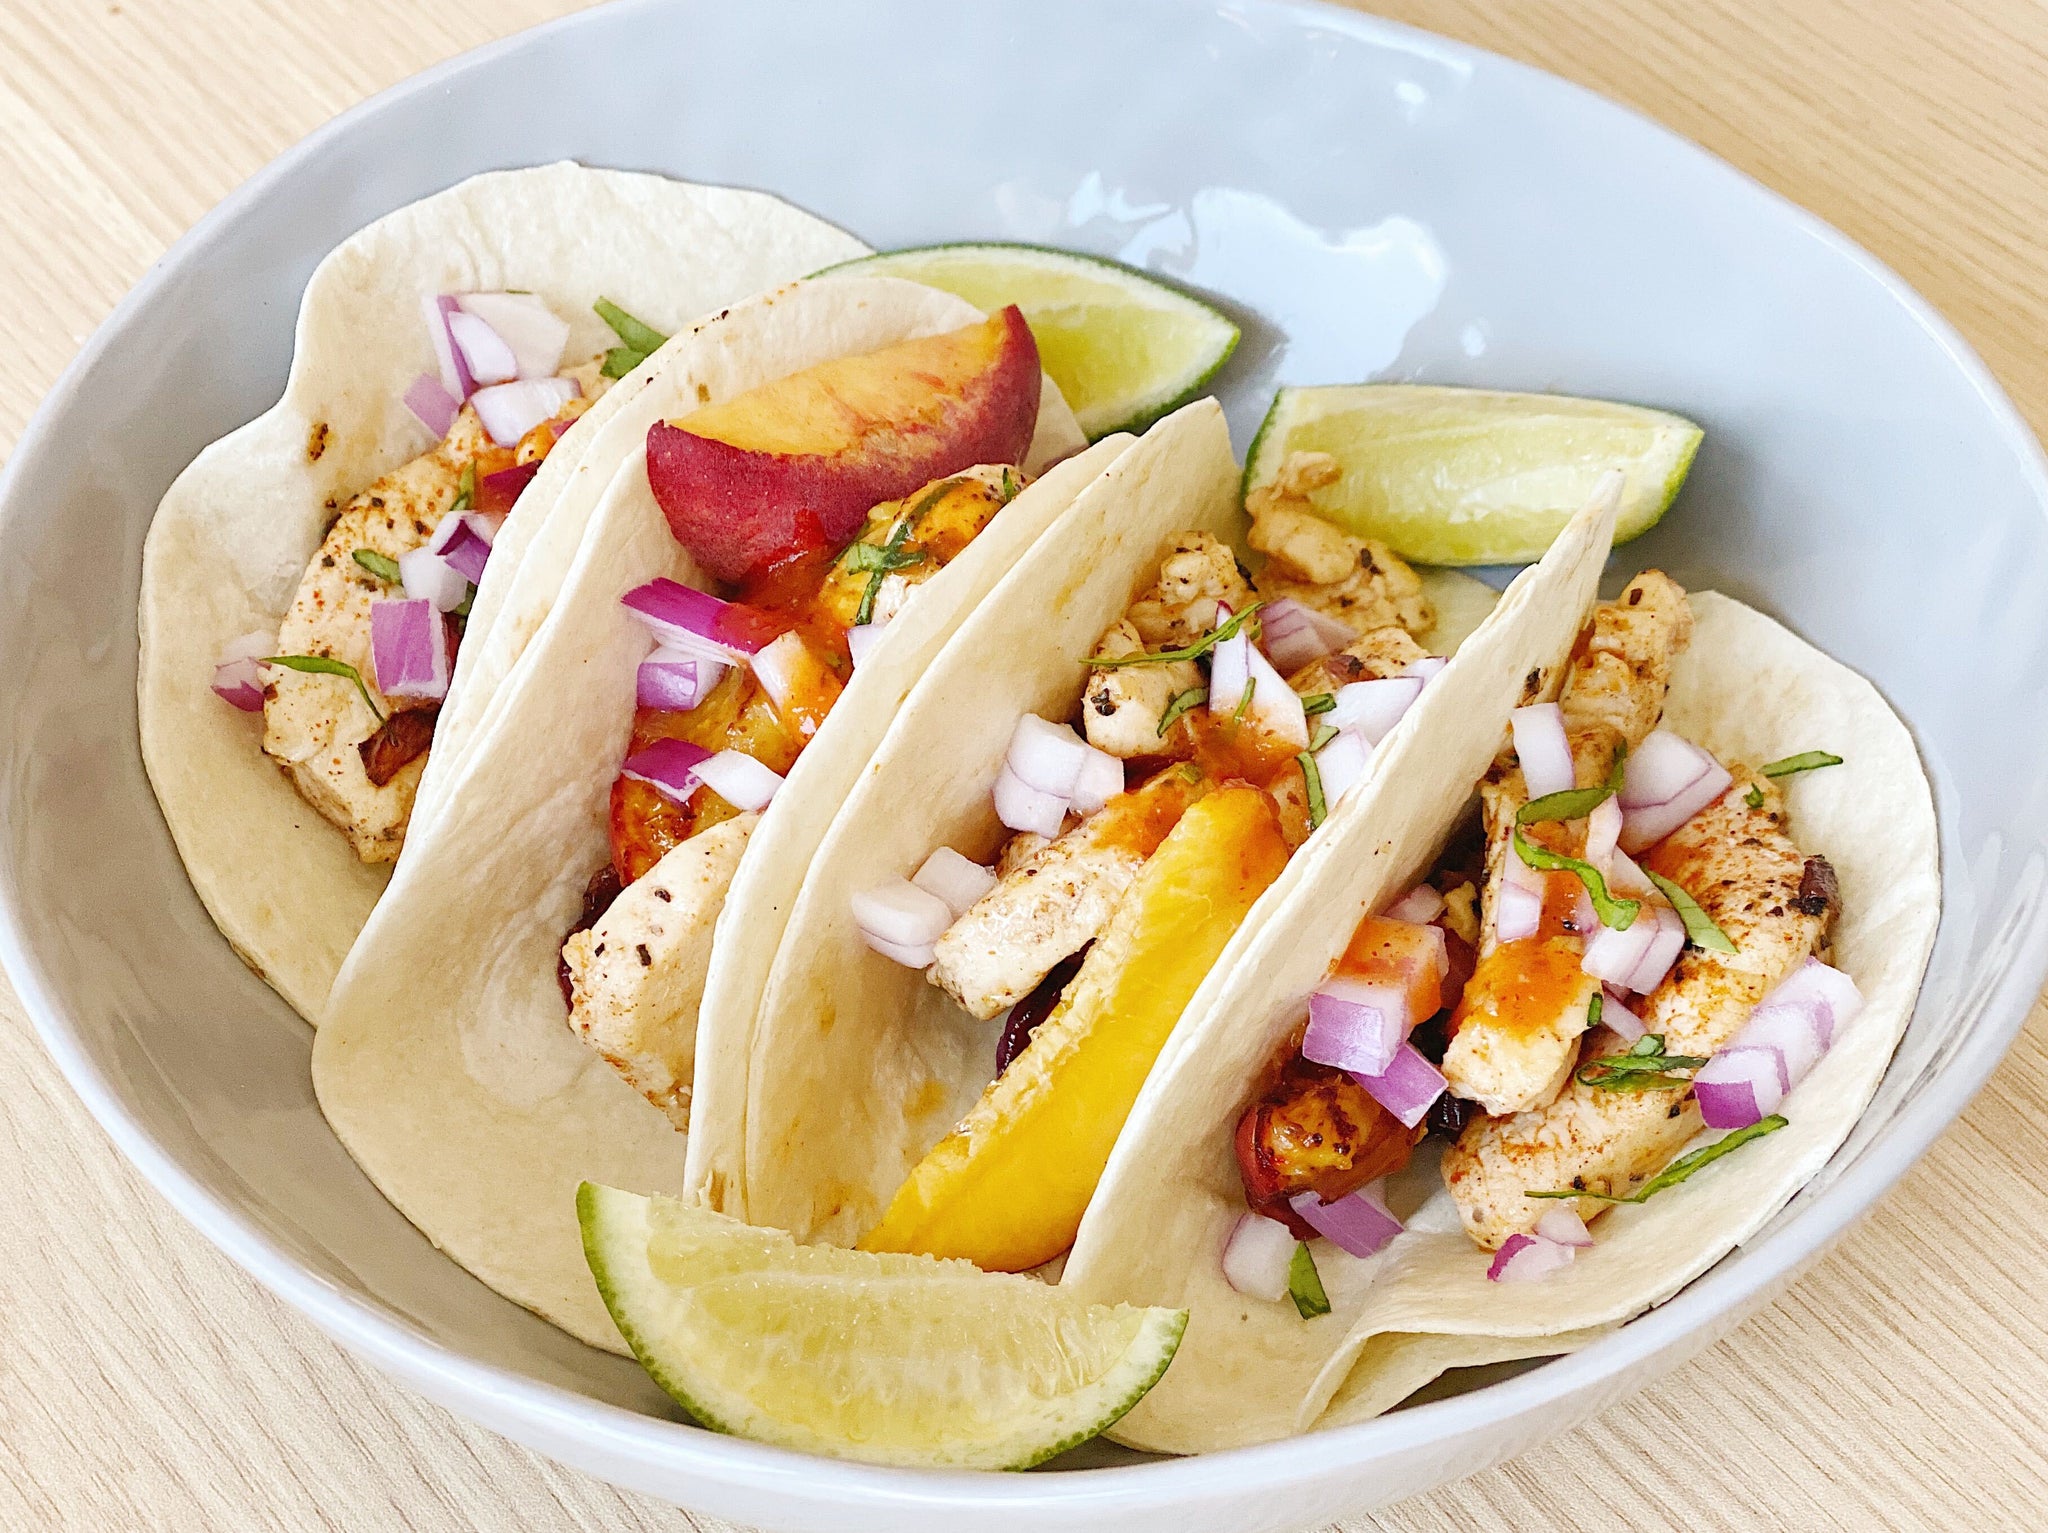 Spicy-Sweet Chicken Tacos with Peach Fire Compote 